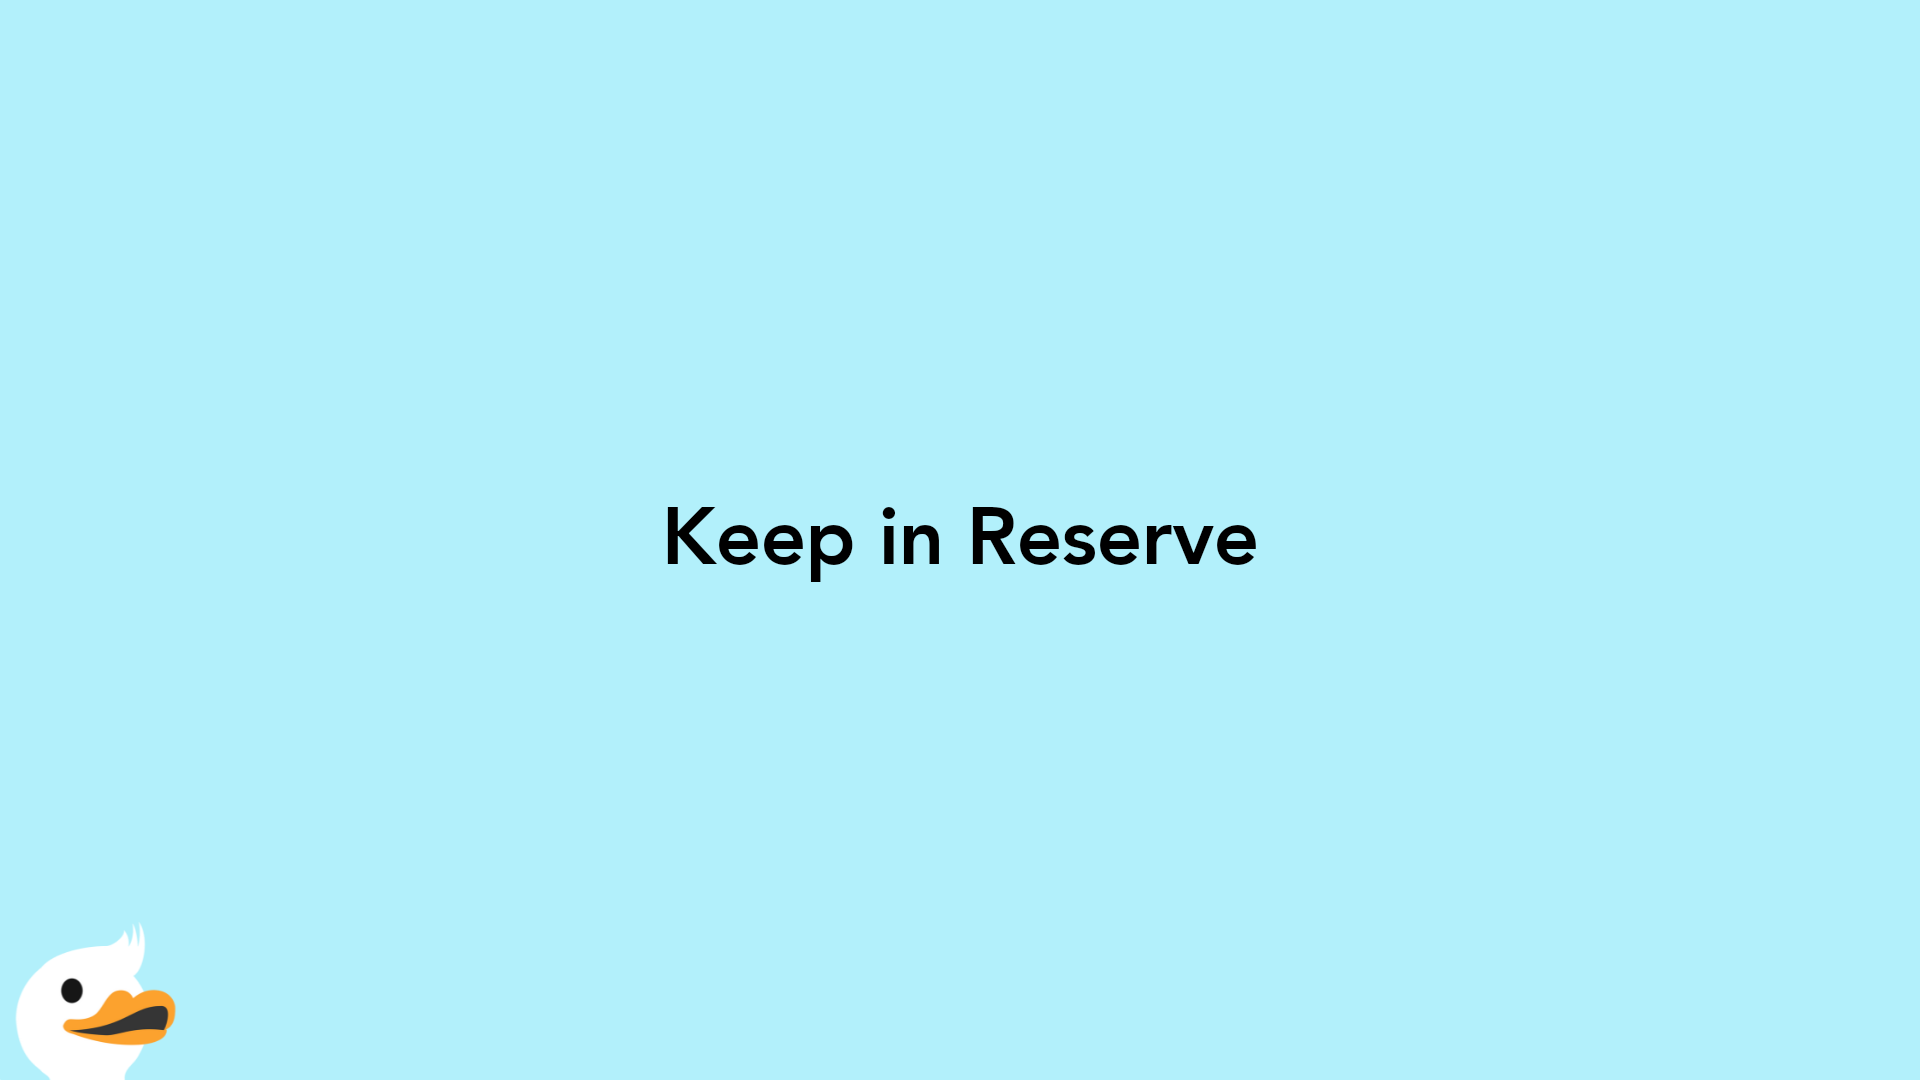 Keep in Reserve